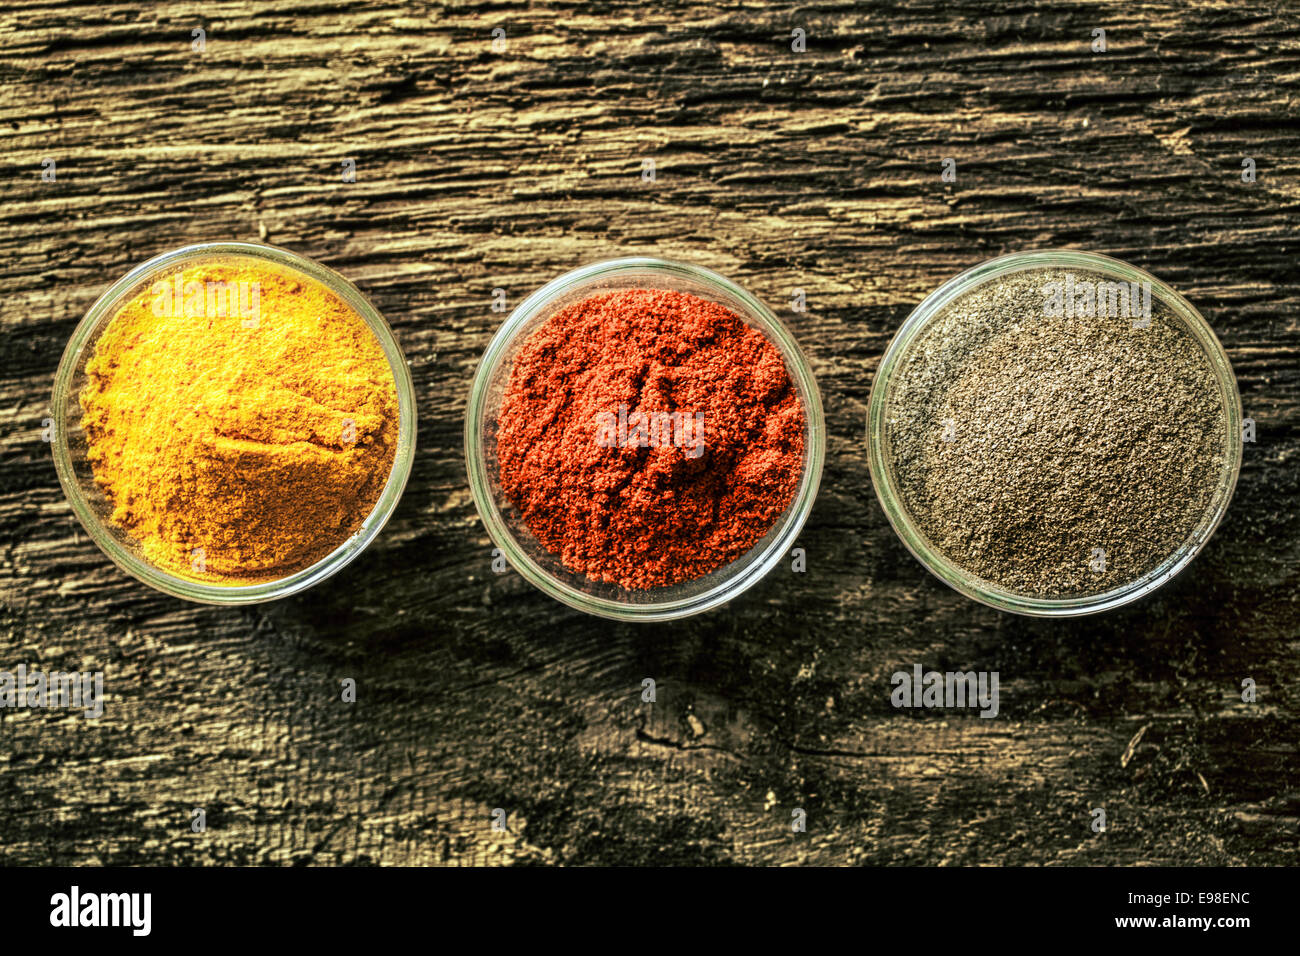 https://c8.alamy.com/comp/E98ENC/overhead-view-of-three-open-spice-containers-with-colourful-curry-E98ENC.jpg